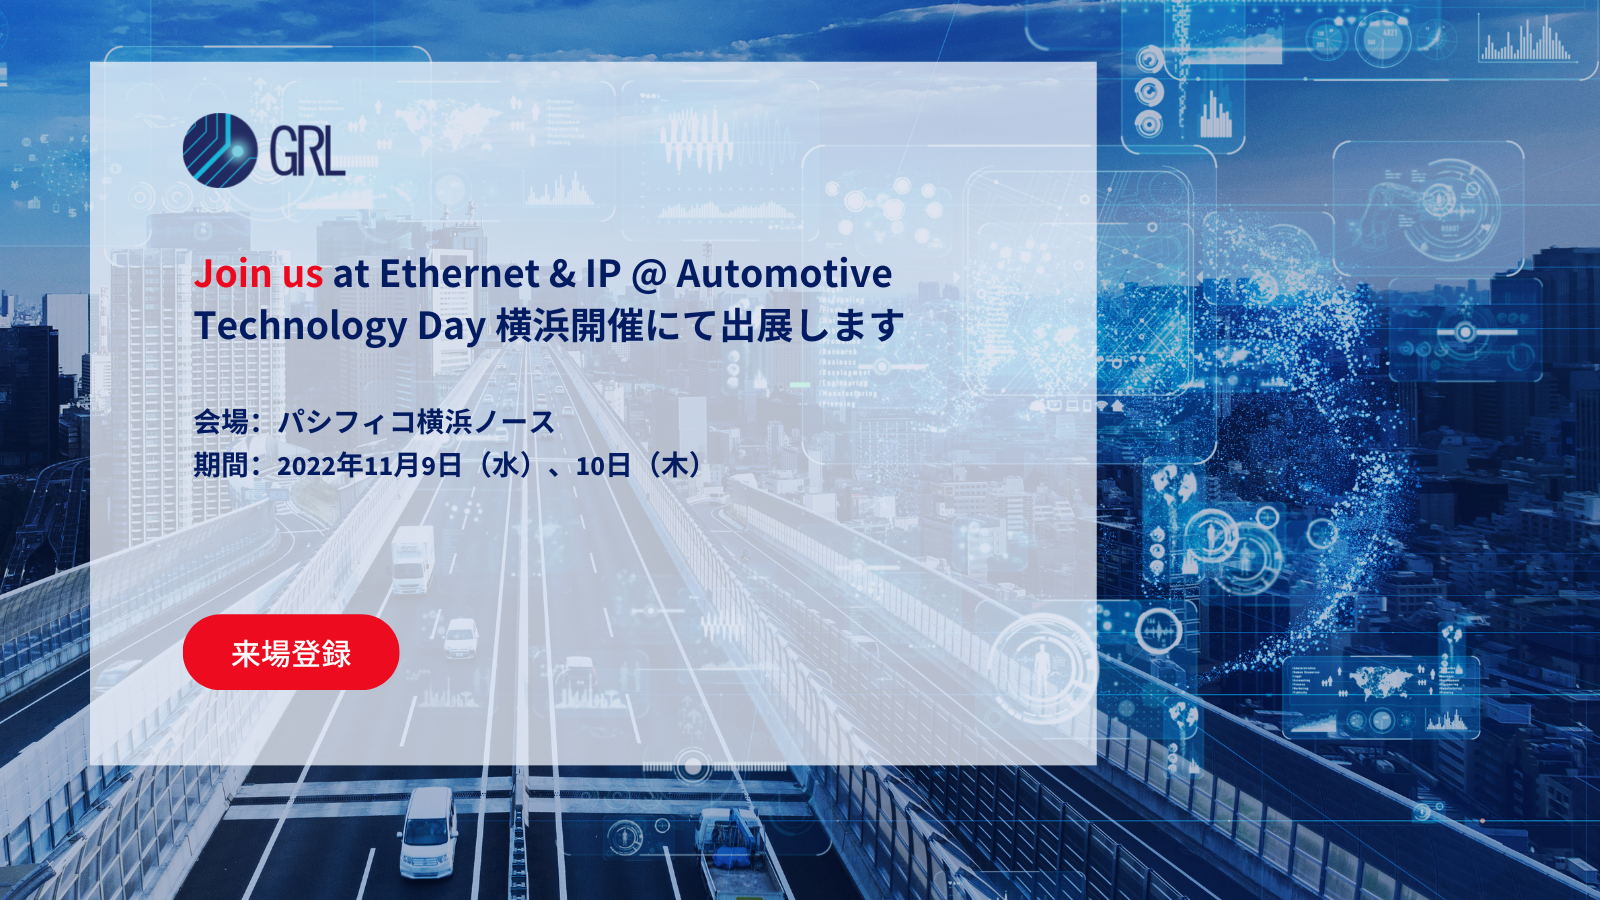 【Ethernet & IP @ Automotive Technology Day】横浜開催にて出展します